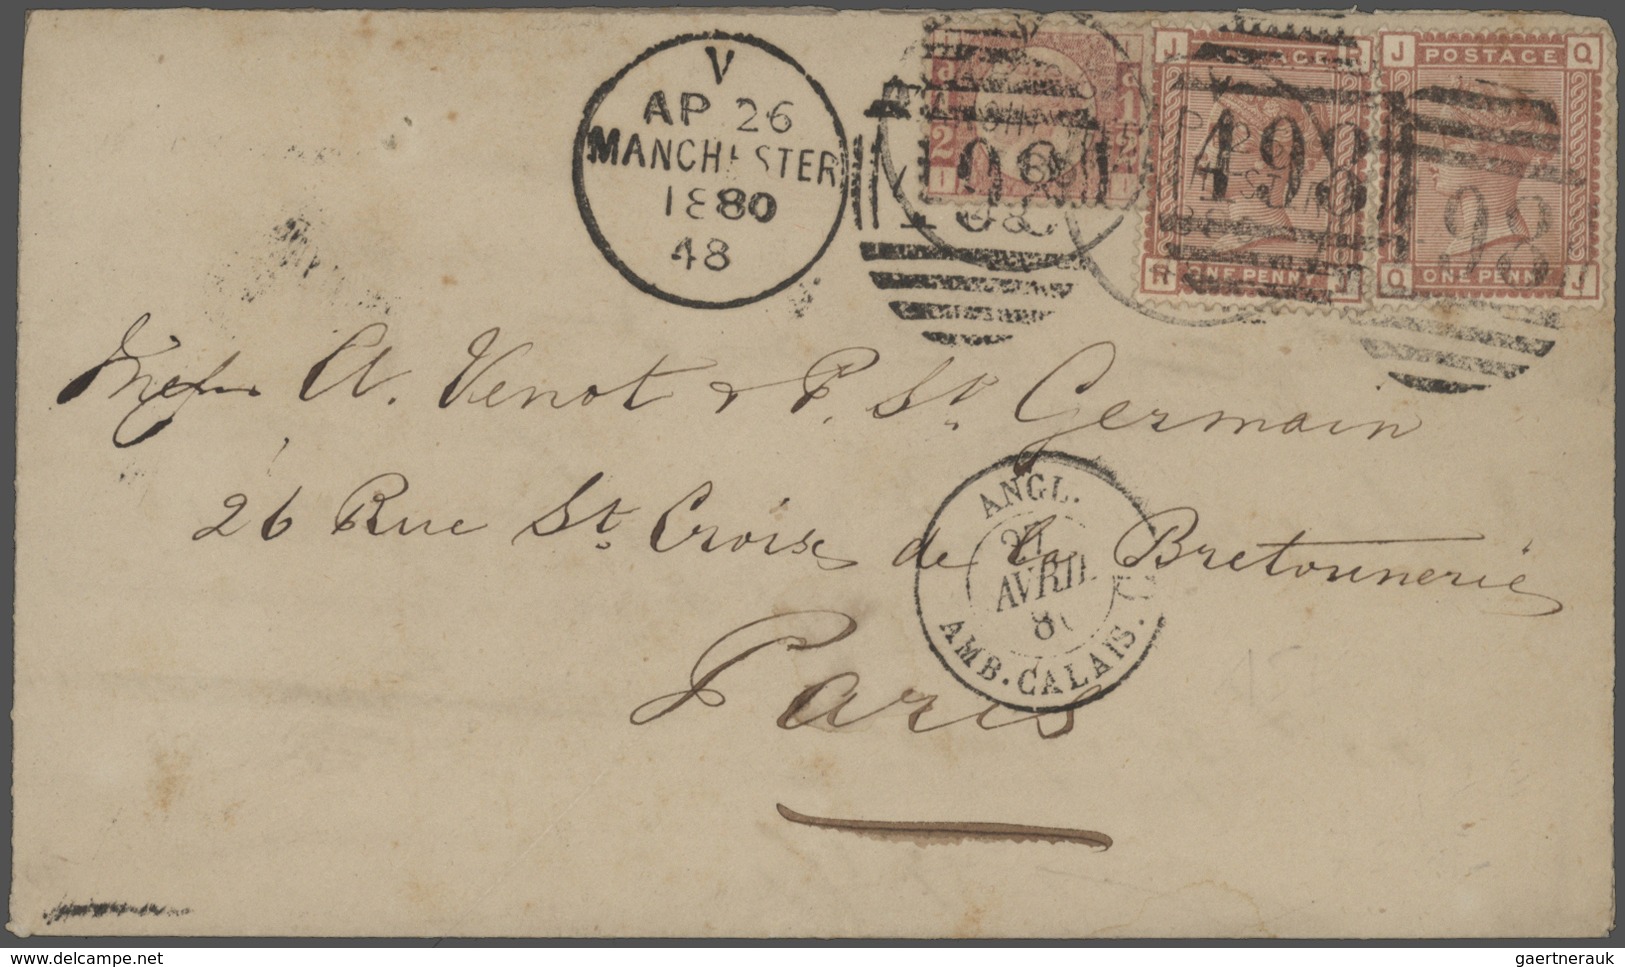 Großbritannien: 1836/1946: 77 better covers and postal stationeries including pre-philatelic, used A